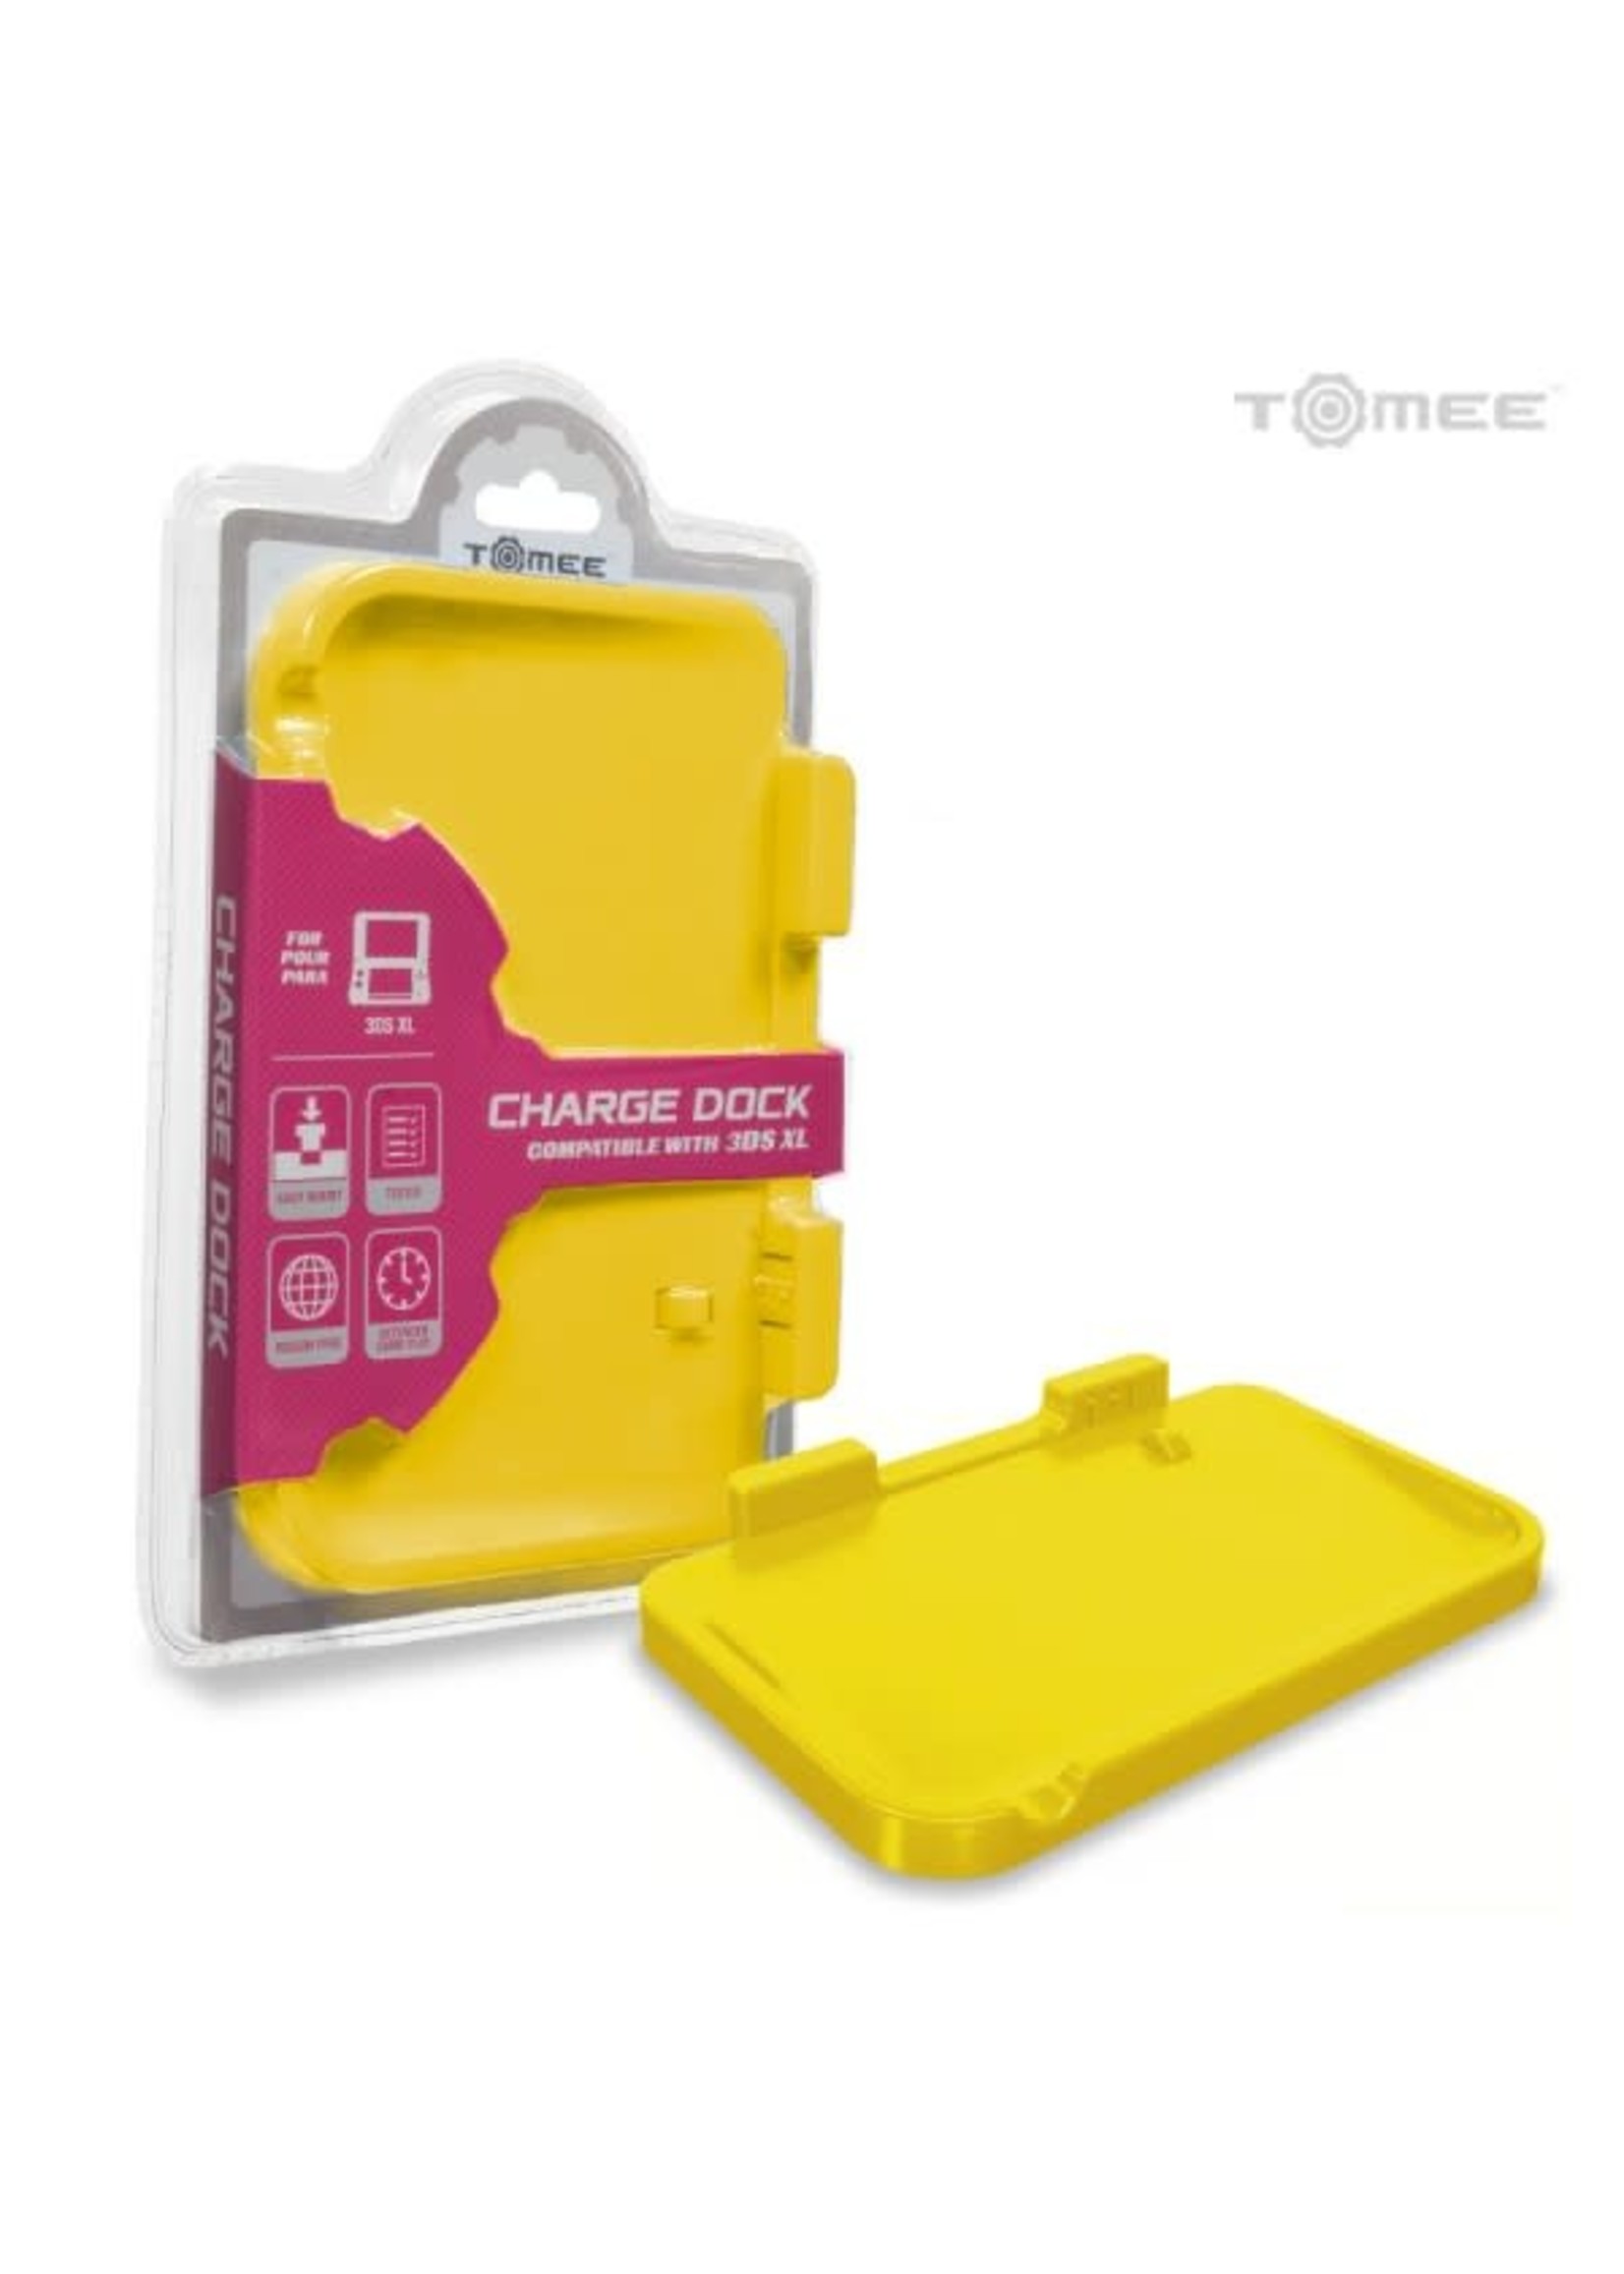 Nintendo 3DS 3DS XL Charge Dock - Yellow